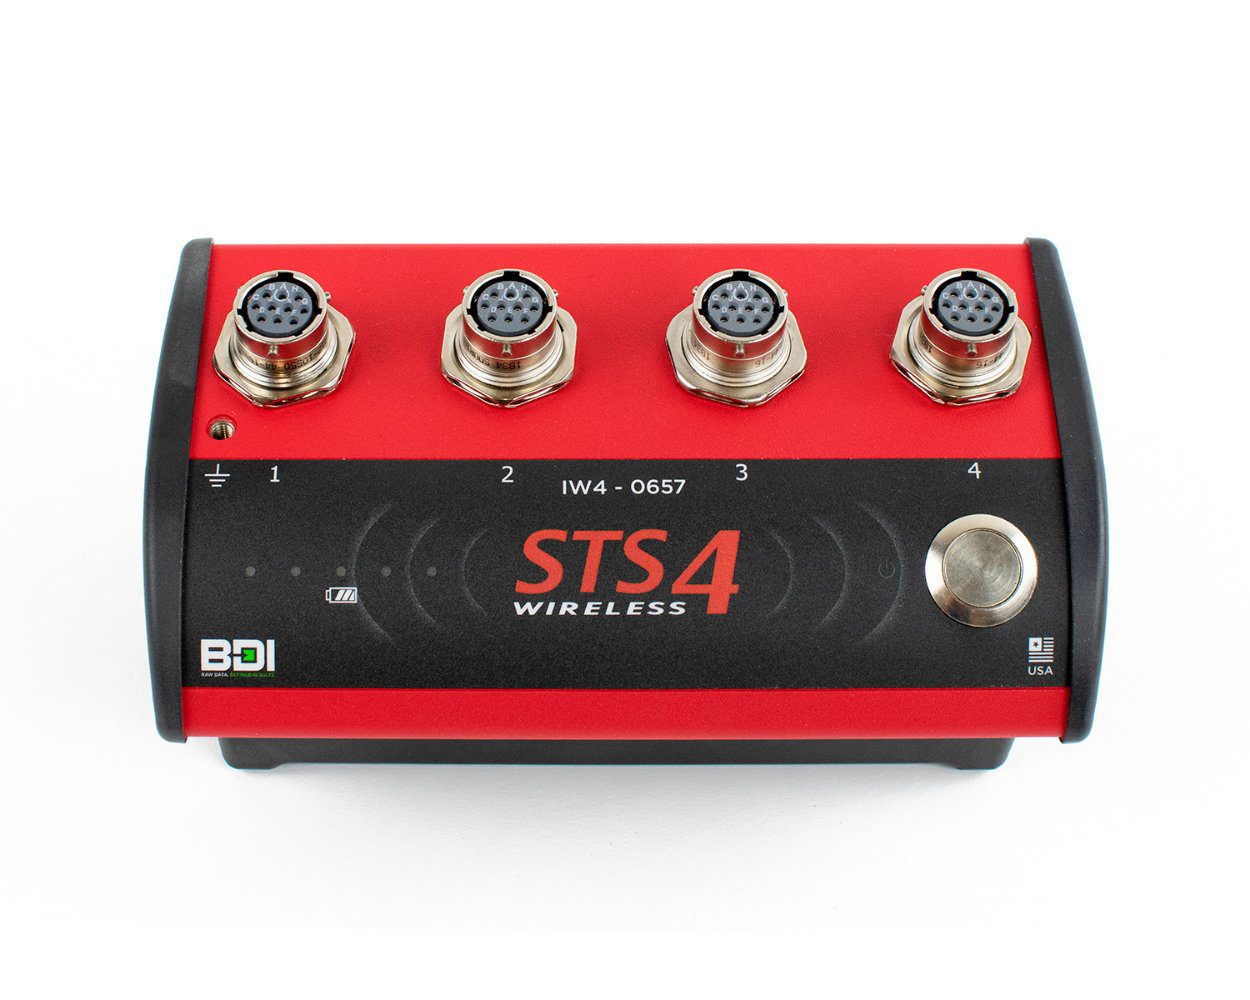 BDI STS4-4-IW3 intelliducer data acquisition node, red and black, top-view